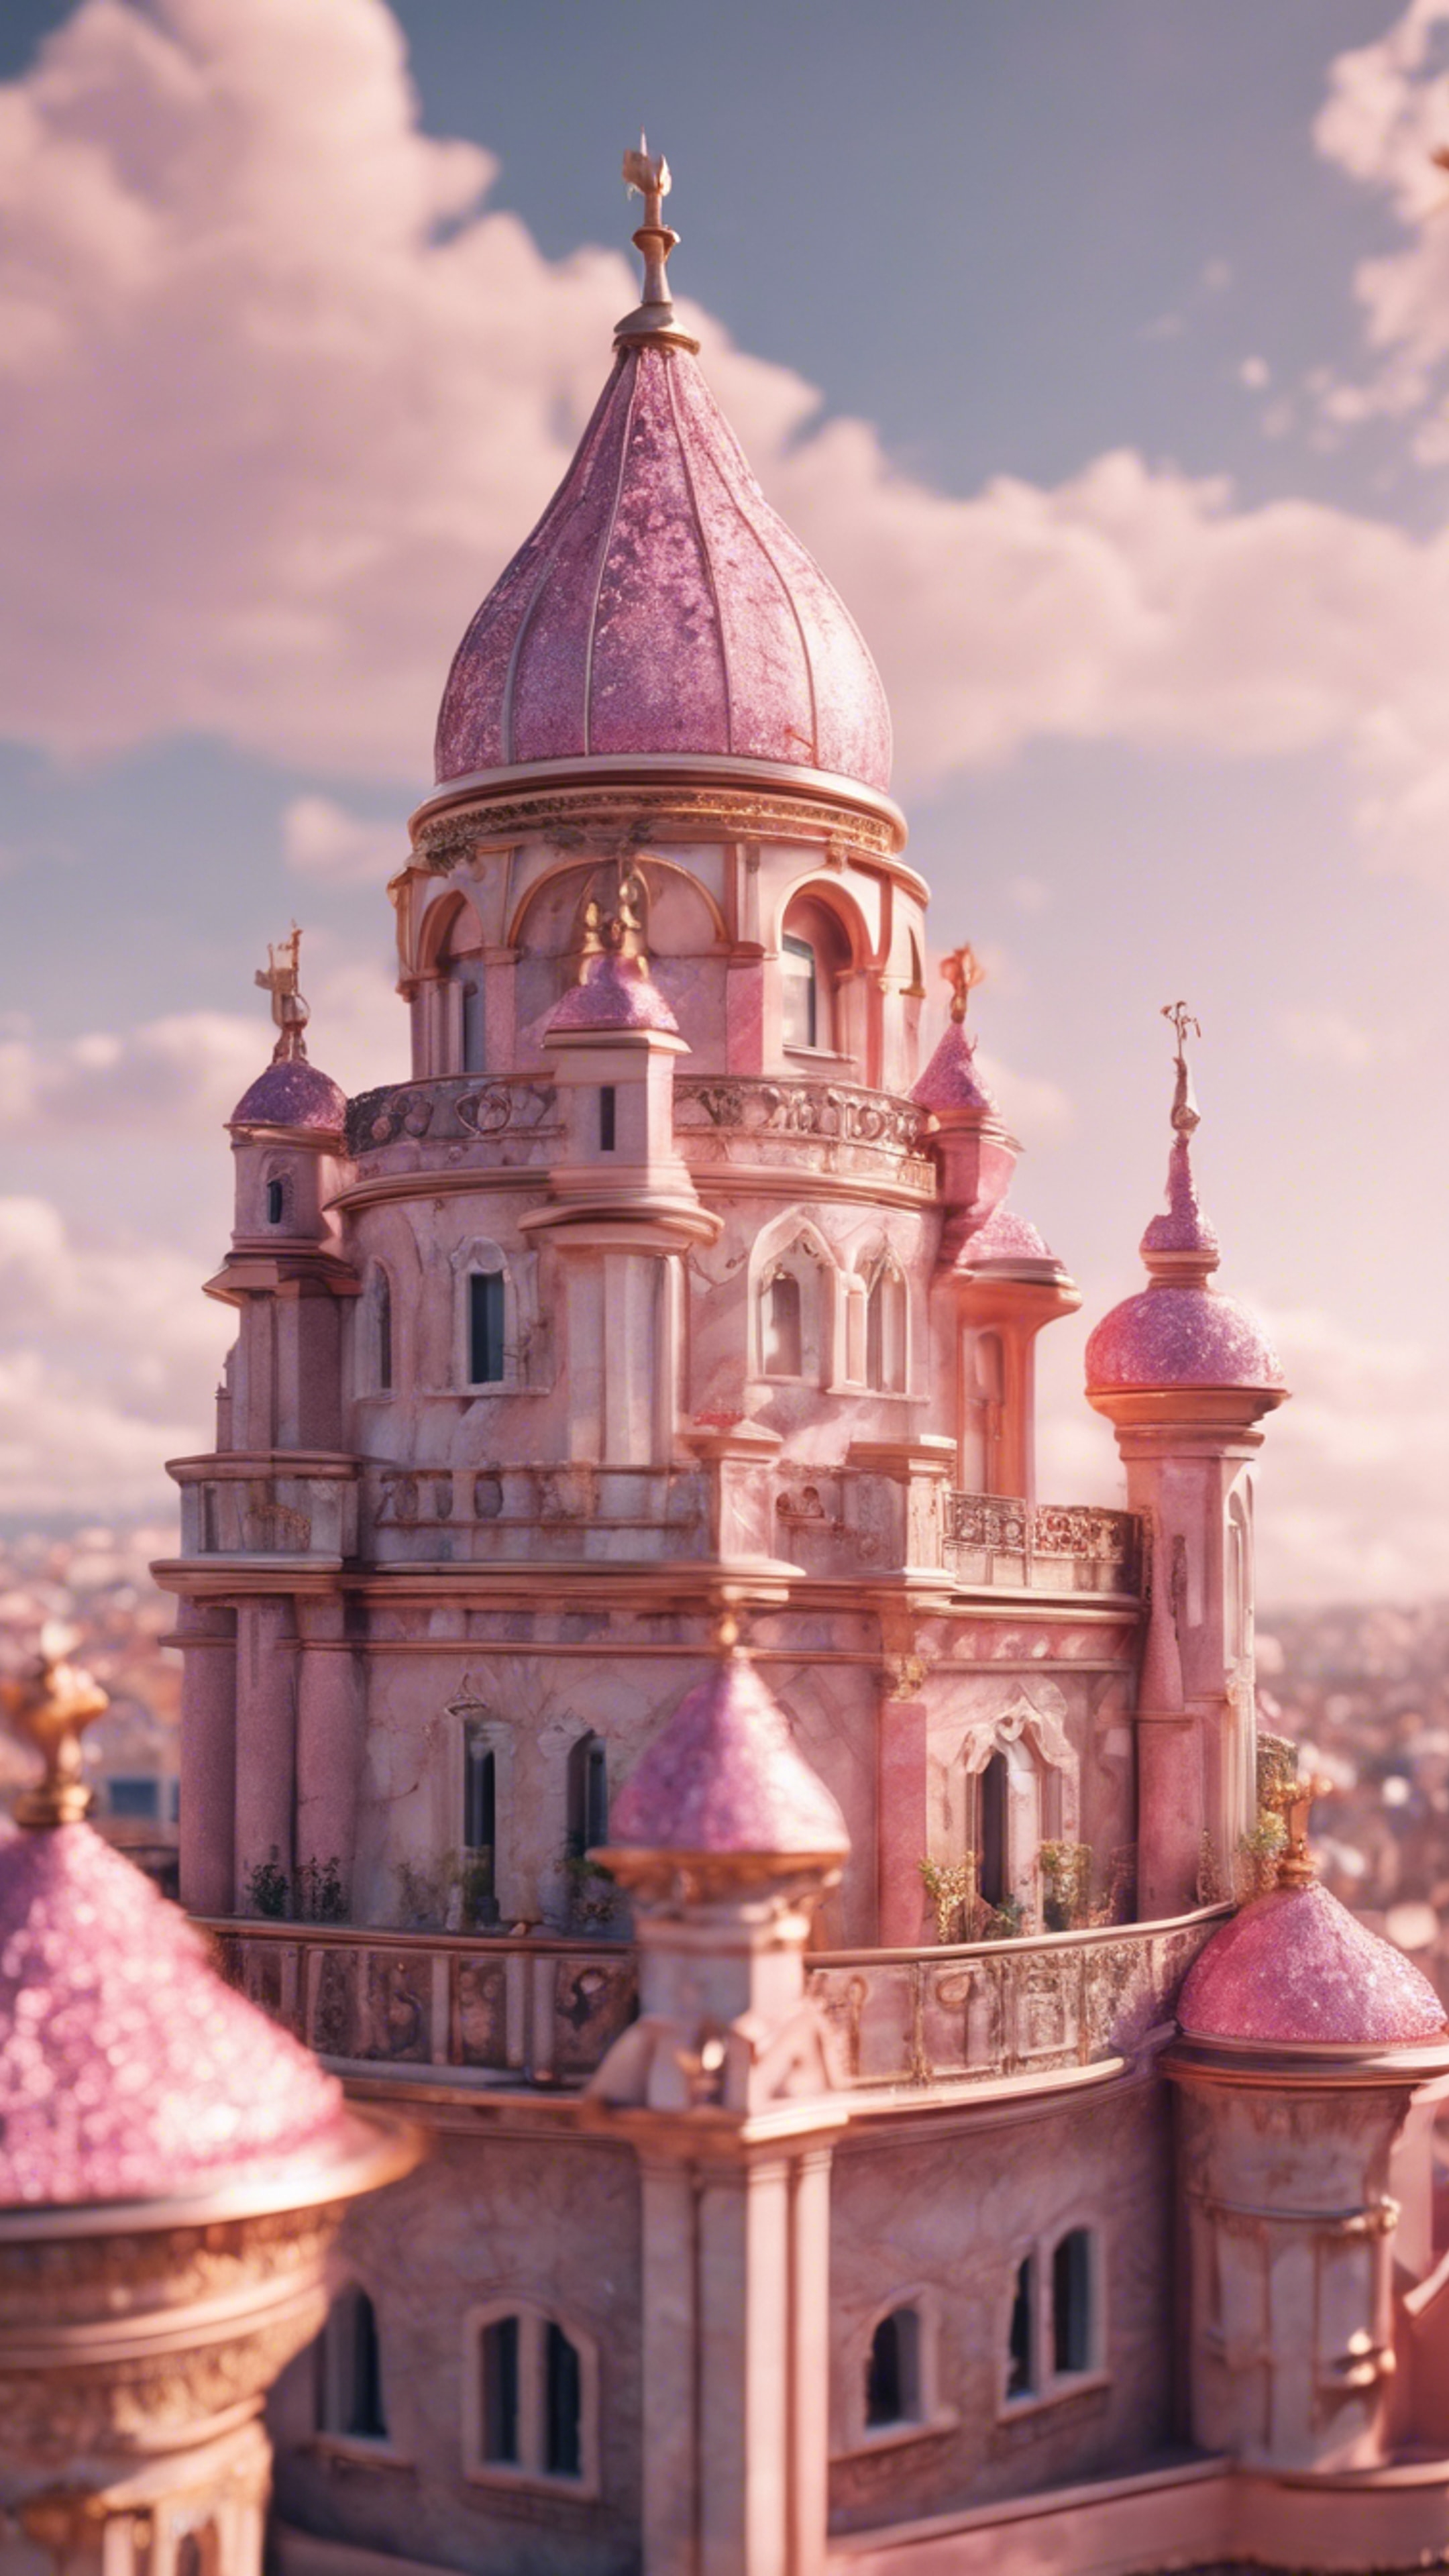 An ornate pink marble castle with glimmering golden rooftops during a sunny afternoon.壁紙[39cdf807c12f4b9c8dd2]